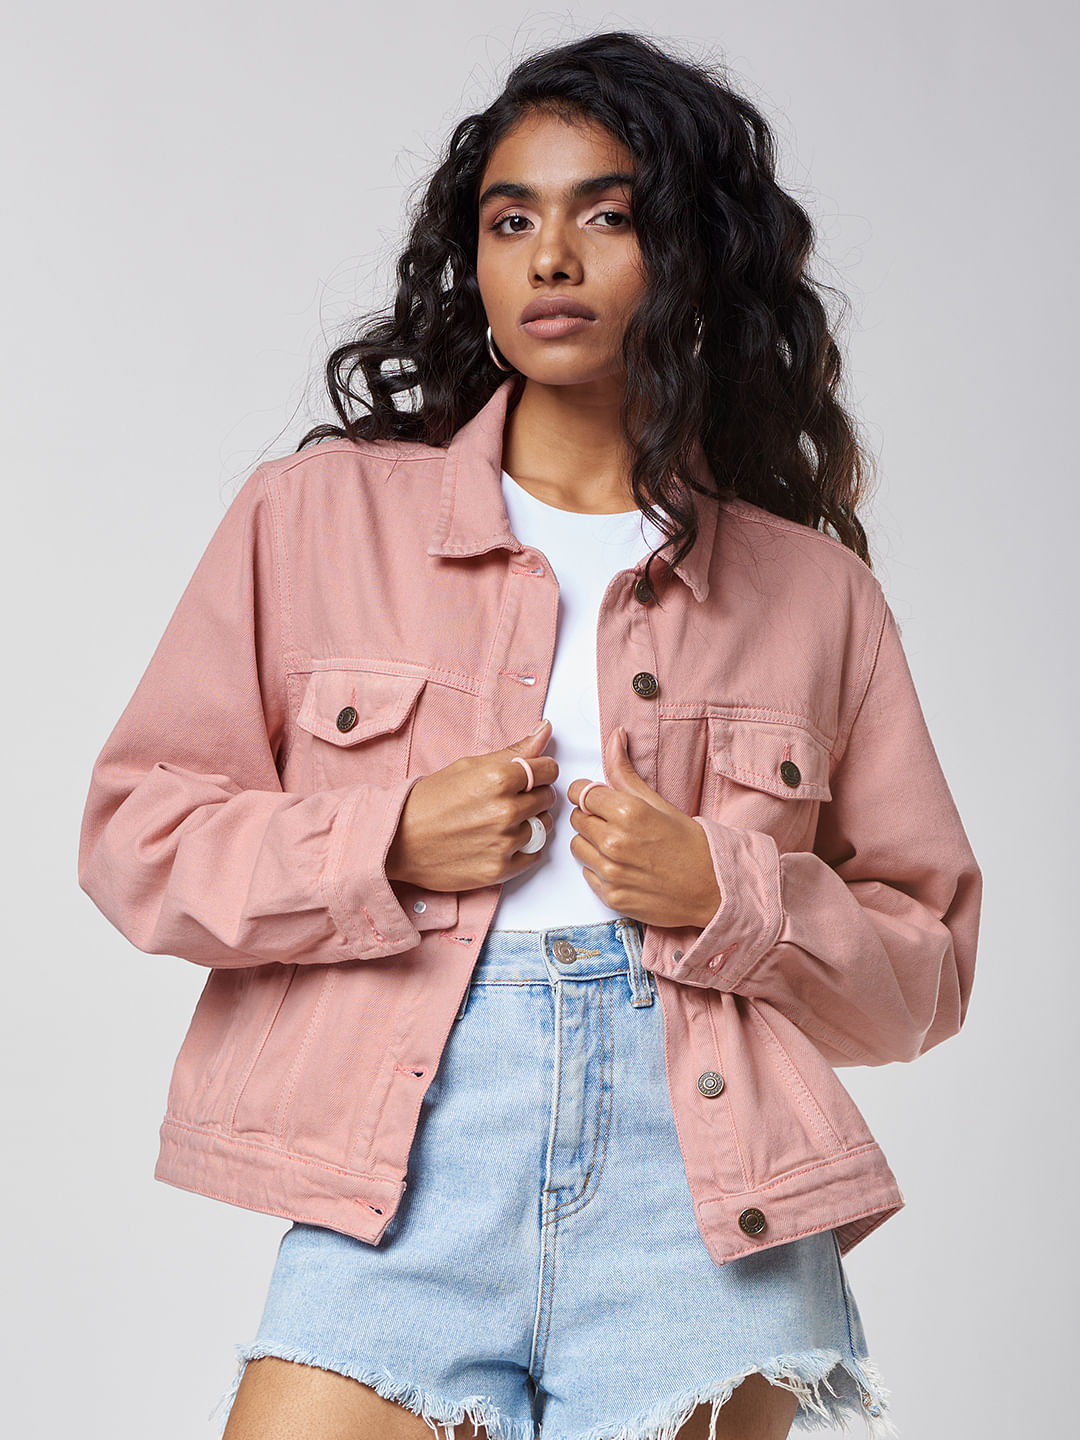 The Souled Store Jackets : Buy The Souled Store Original Solid Peach Women Denim  Jacket Online | Nykaa Fashion